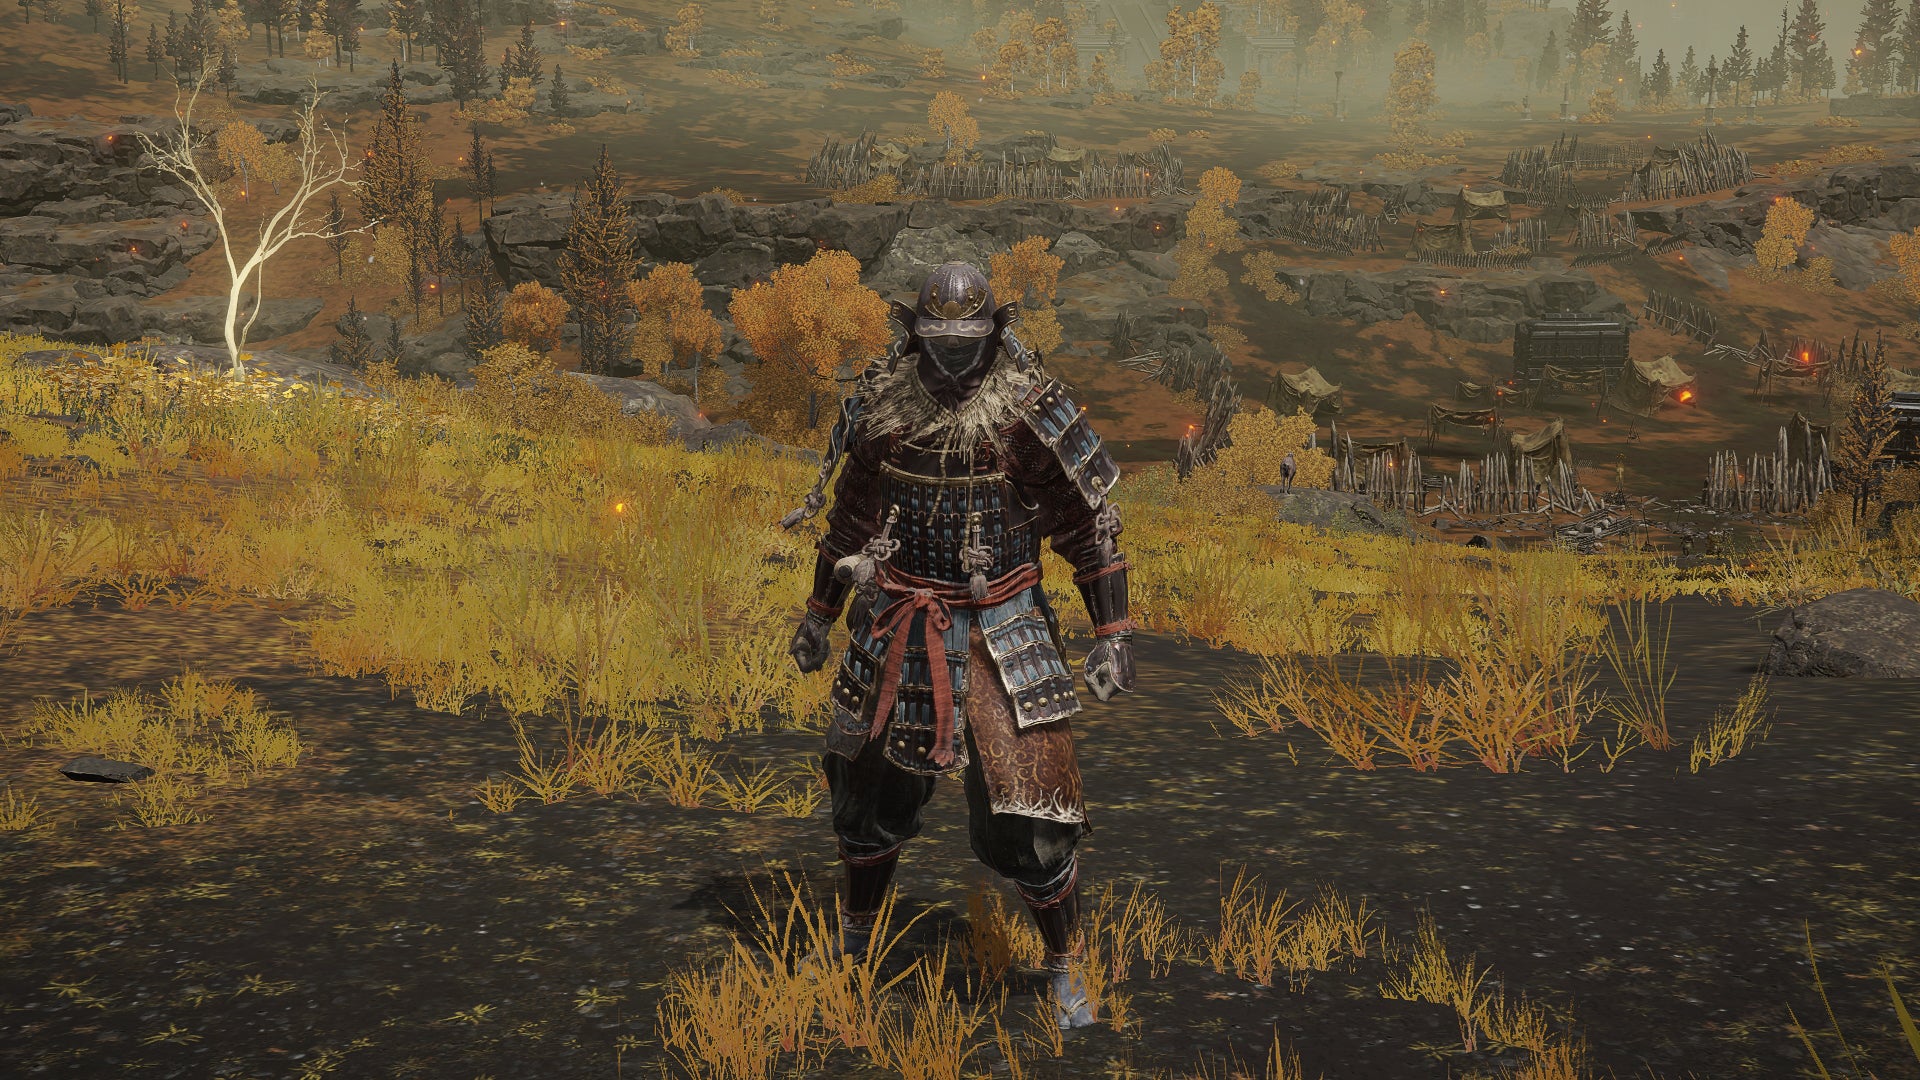 The player in Elden Ring stands in front of the camera wearing the Land Of Reeds armour set. Behind them is a view of the Altus Plateau.